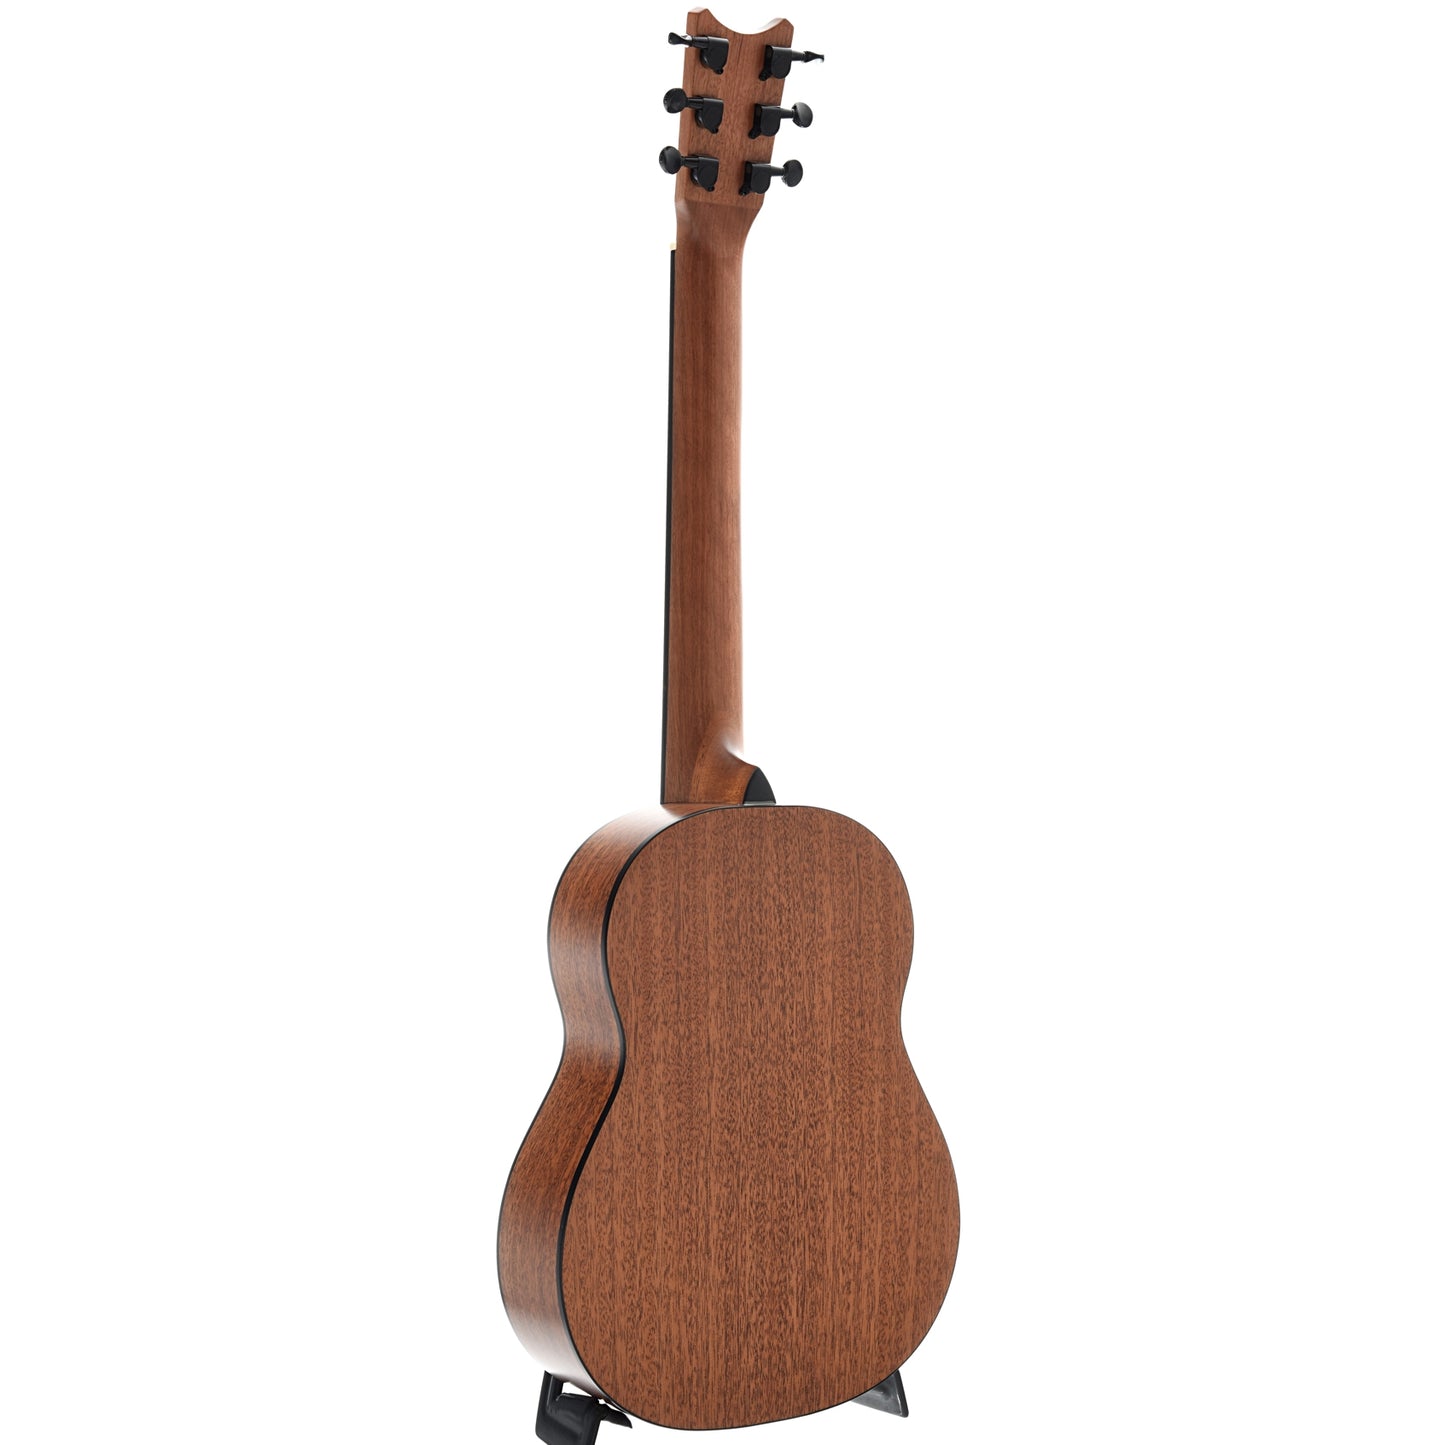 Image 10 of Romero Creations Pepe Romero, SR. Signature Model, Solid Spruce and Mahogany, with Case - SKU# RPR6SM : Product Type Classical & Flamenco Guitars : Elderly Instruments